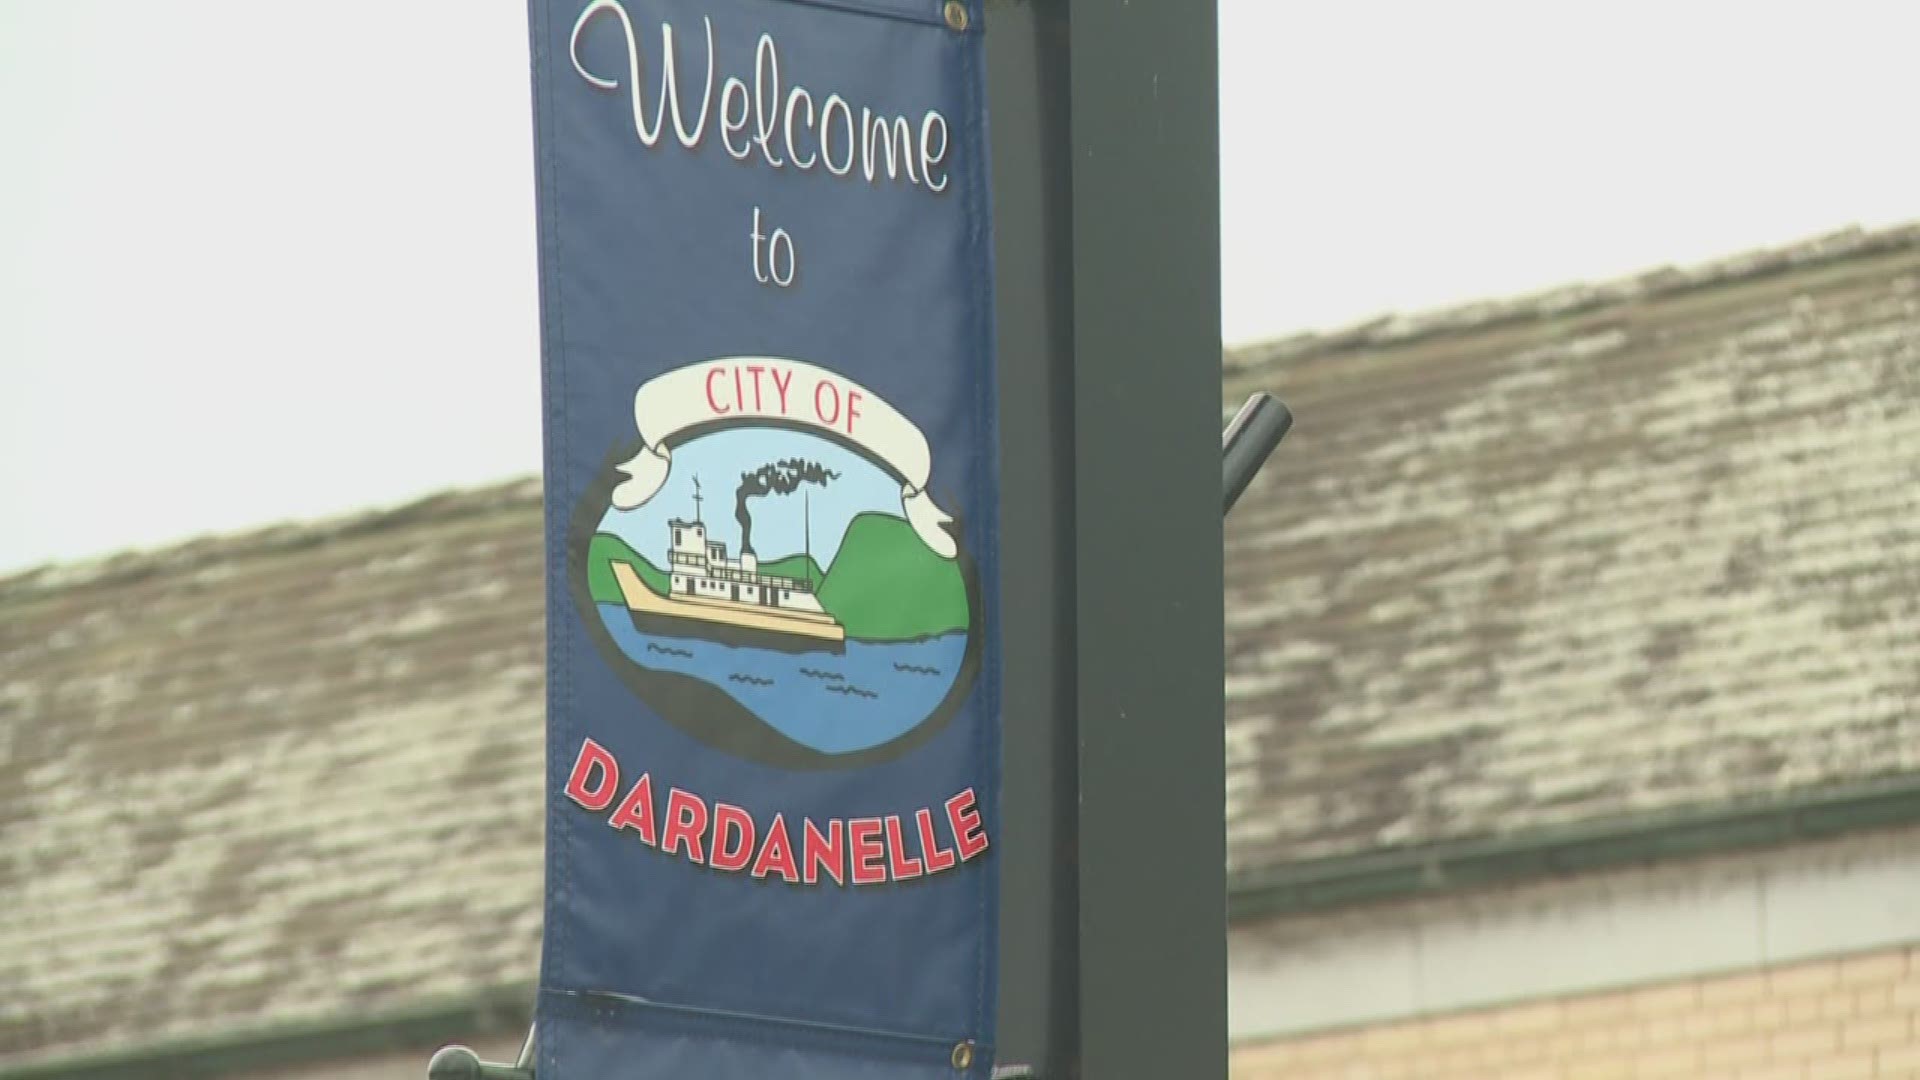 In Dardanelle, uncertainty rose with the flood water, but they had someone they could count on - their mayor.